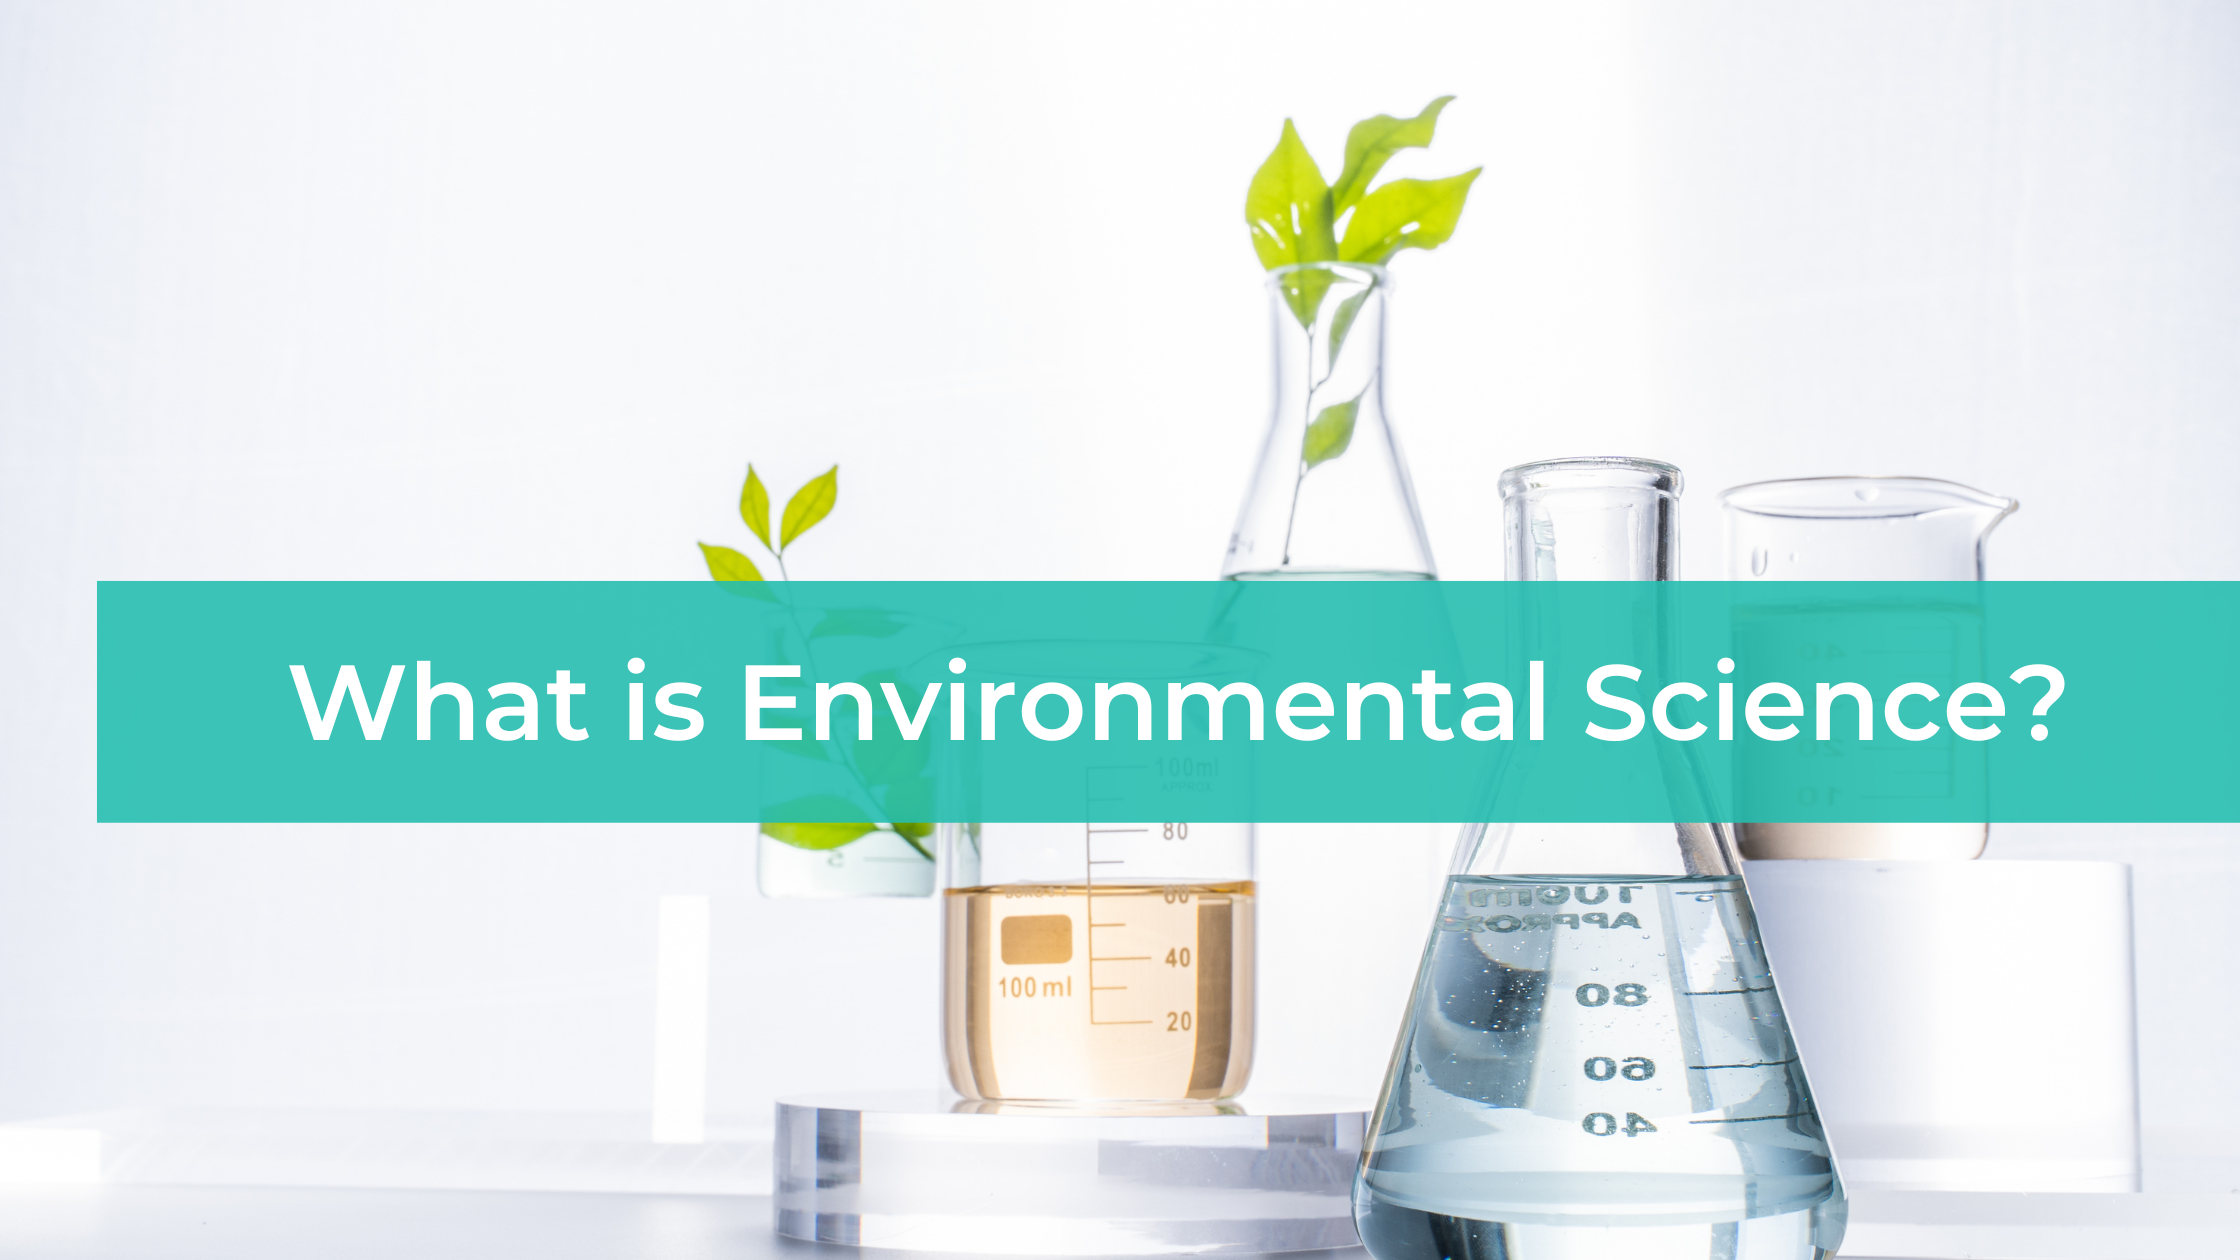 What is Environmental Science?